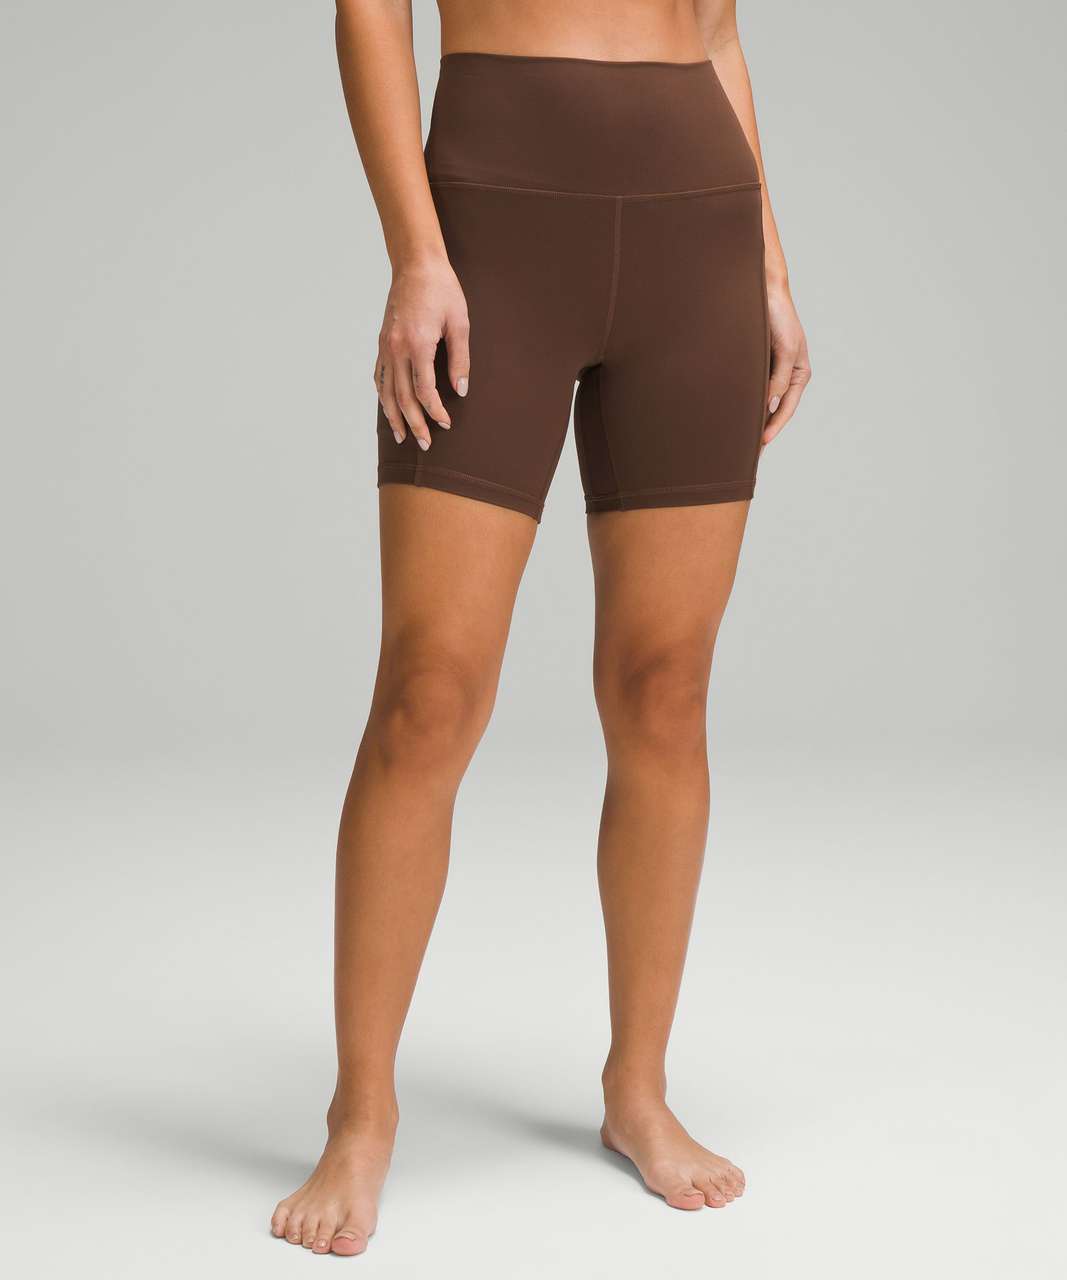 Lululemon Align High-Rise Short with Pockets 6" - Java (First Release)